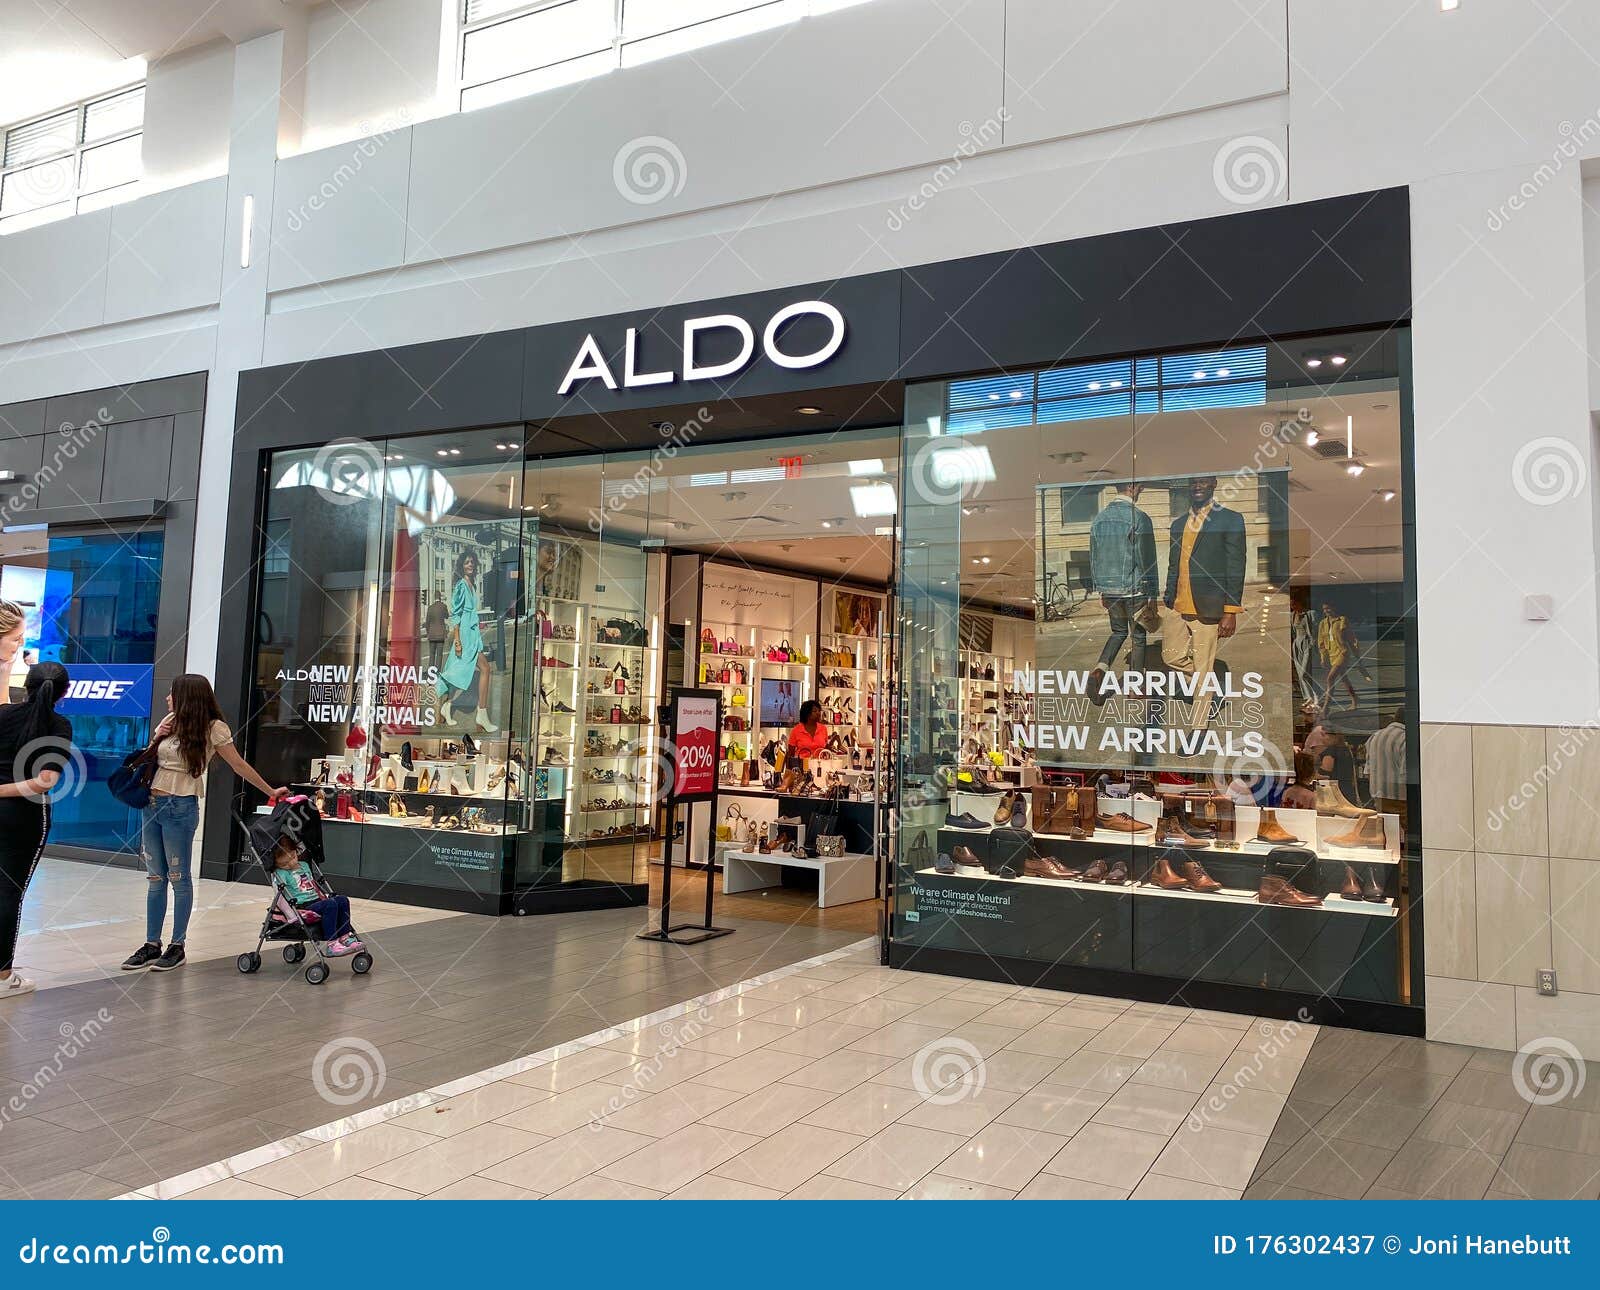 An Aldo Retail Fashion Shoes Accessories Store in Indoor Mall in Orlando, FL Editorial Photography - Image of display, purse: 176302437